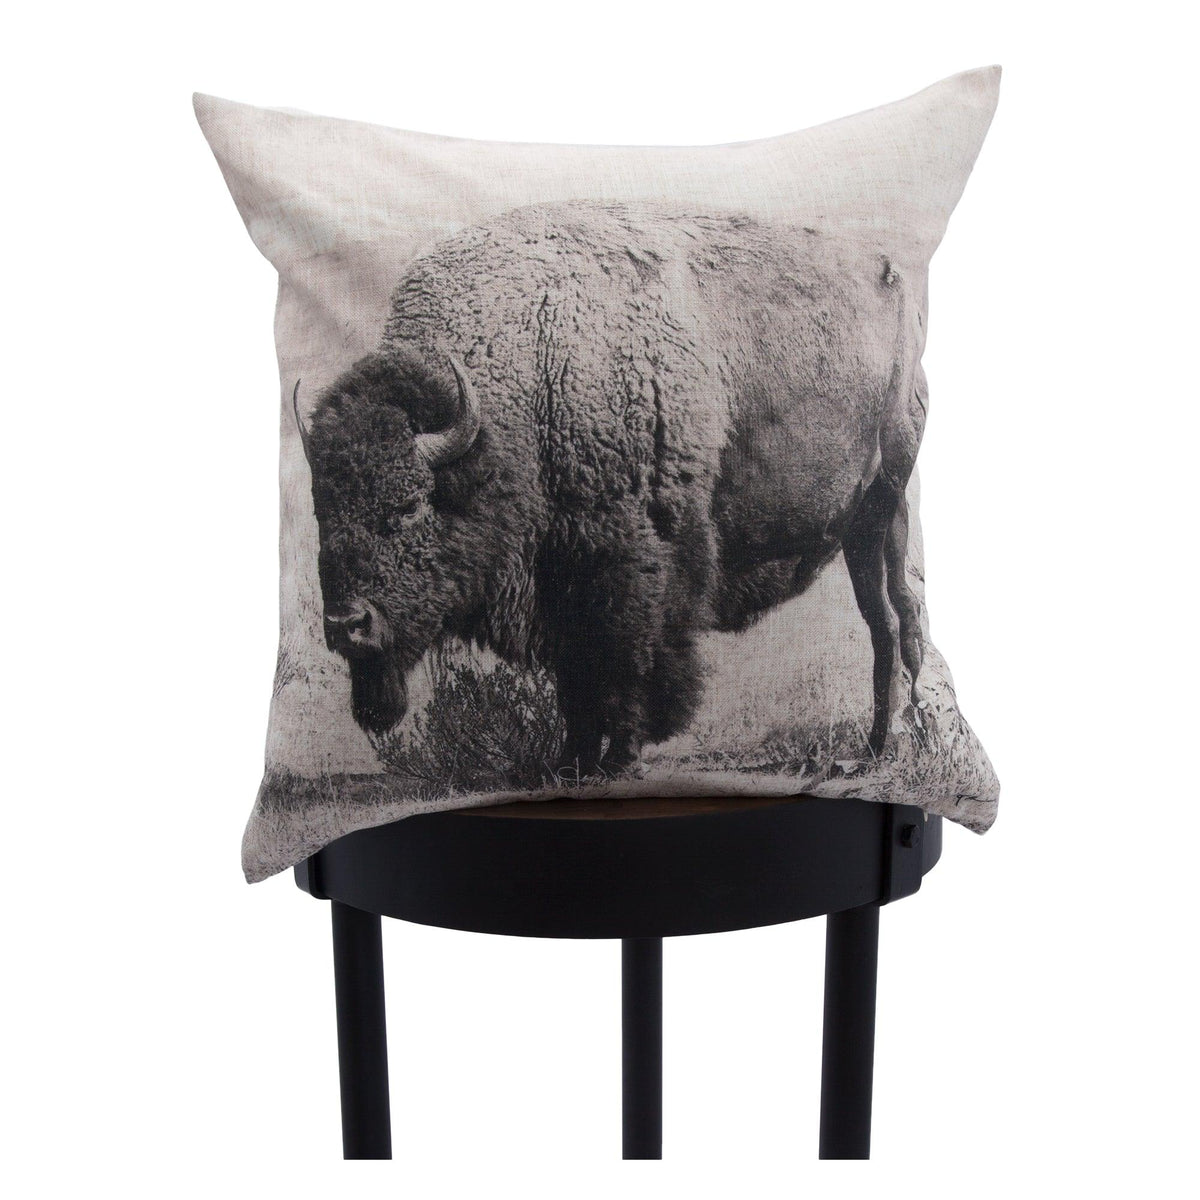 Montreal Lighting & Hardware - Russ Pillow by Renwil - Montreal Lighting & Hardware